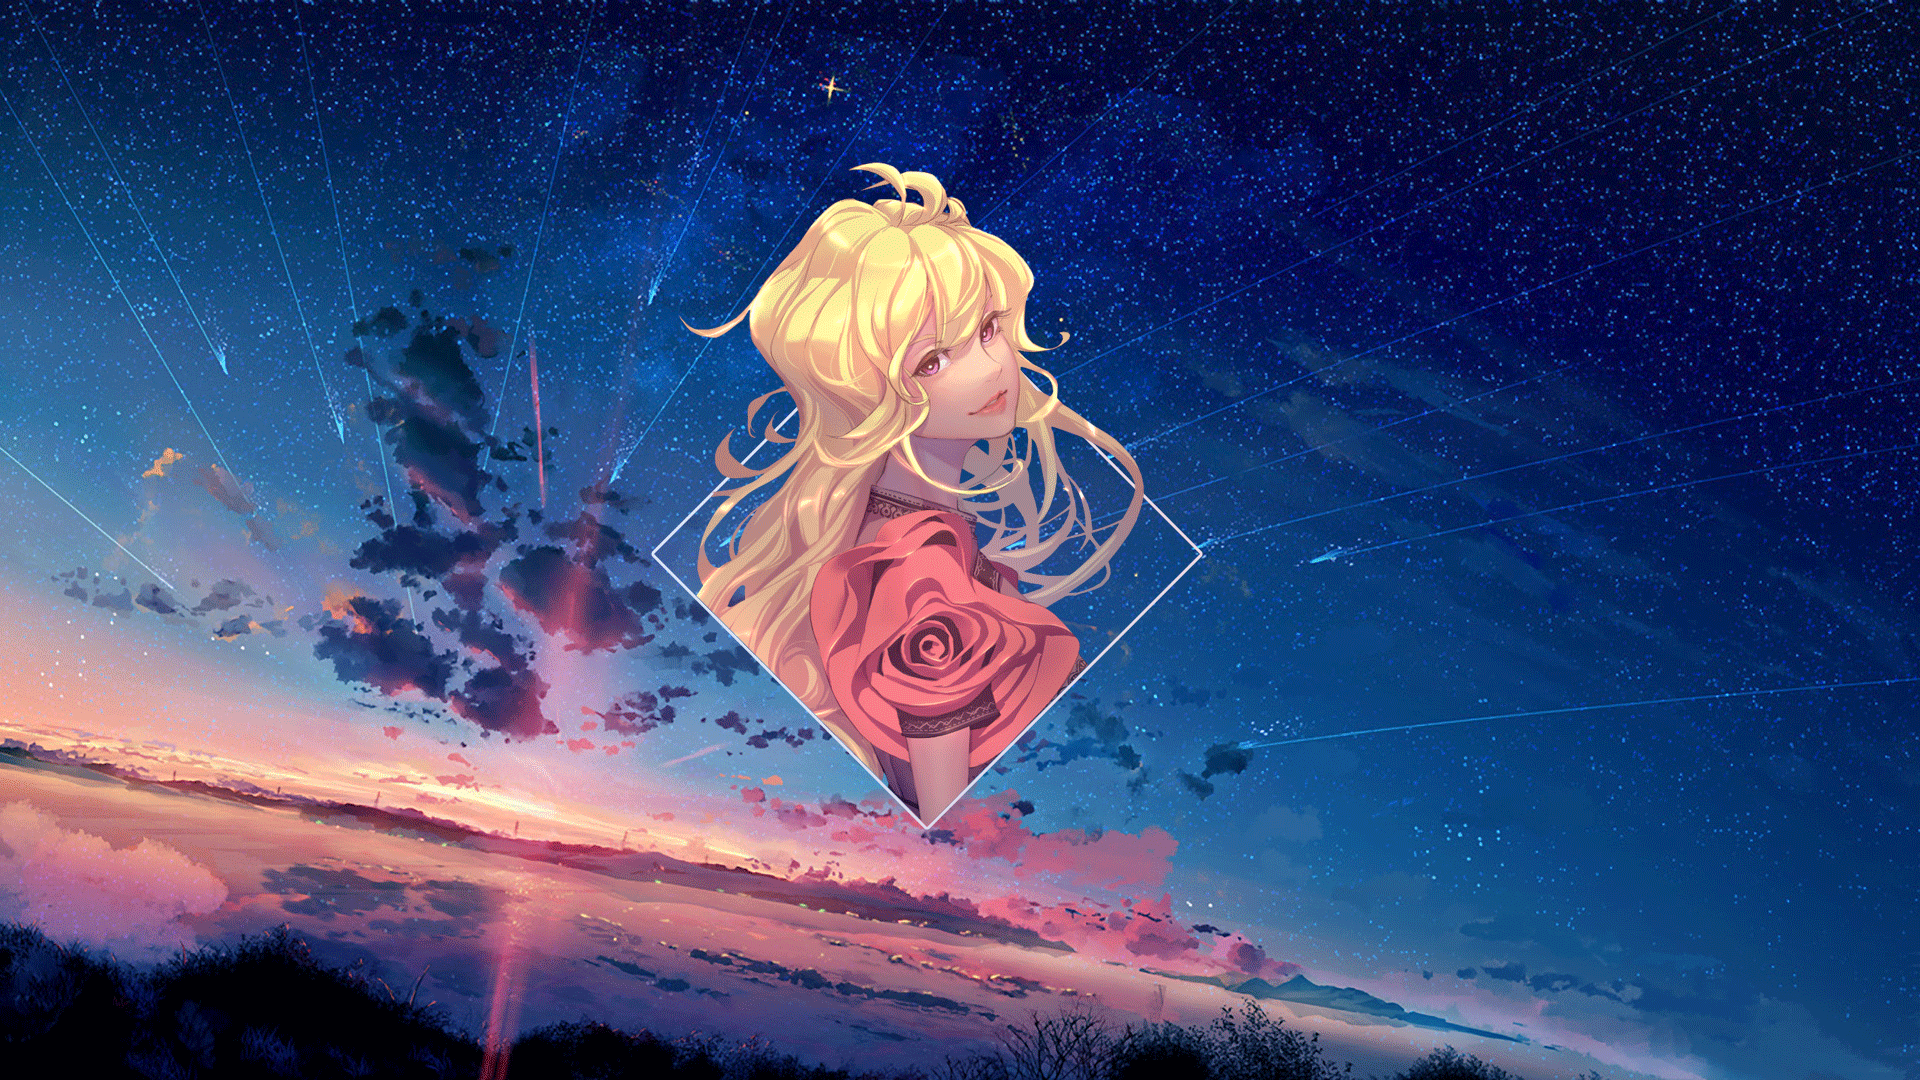 Anime 1920x1080 anime anime girls rose stars digital art picture-in-picture landscape sky